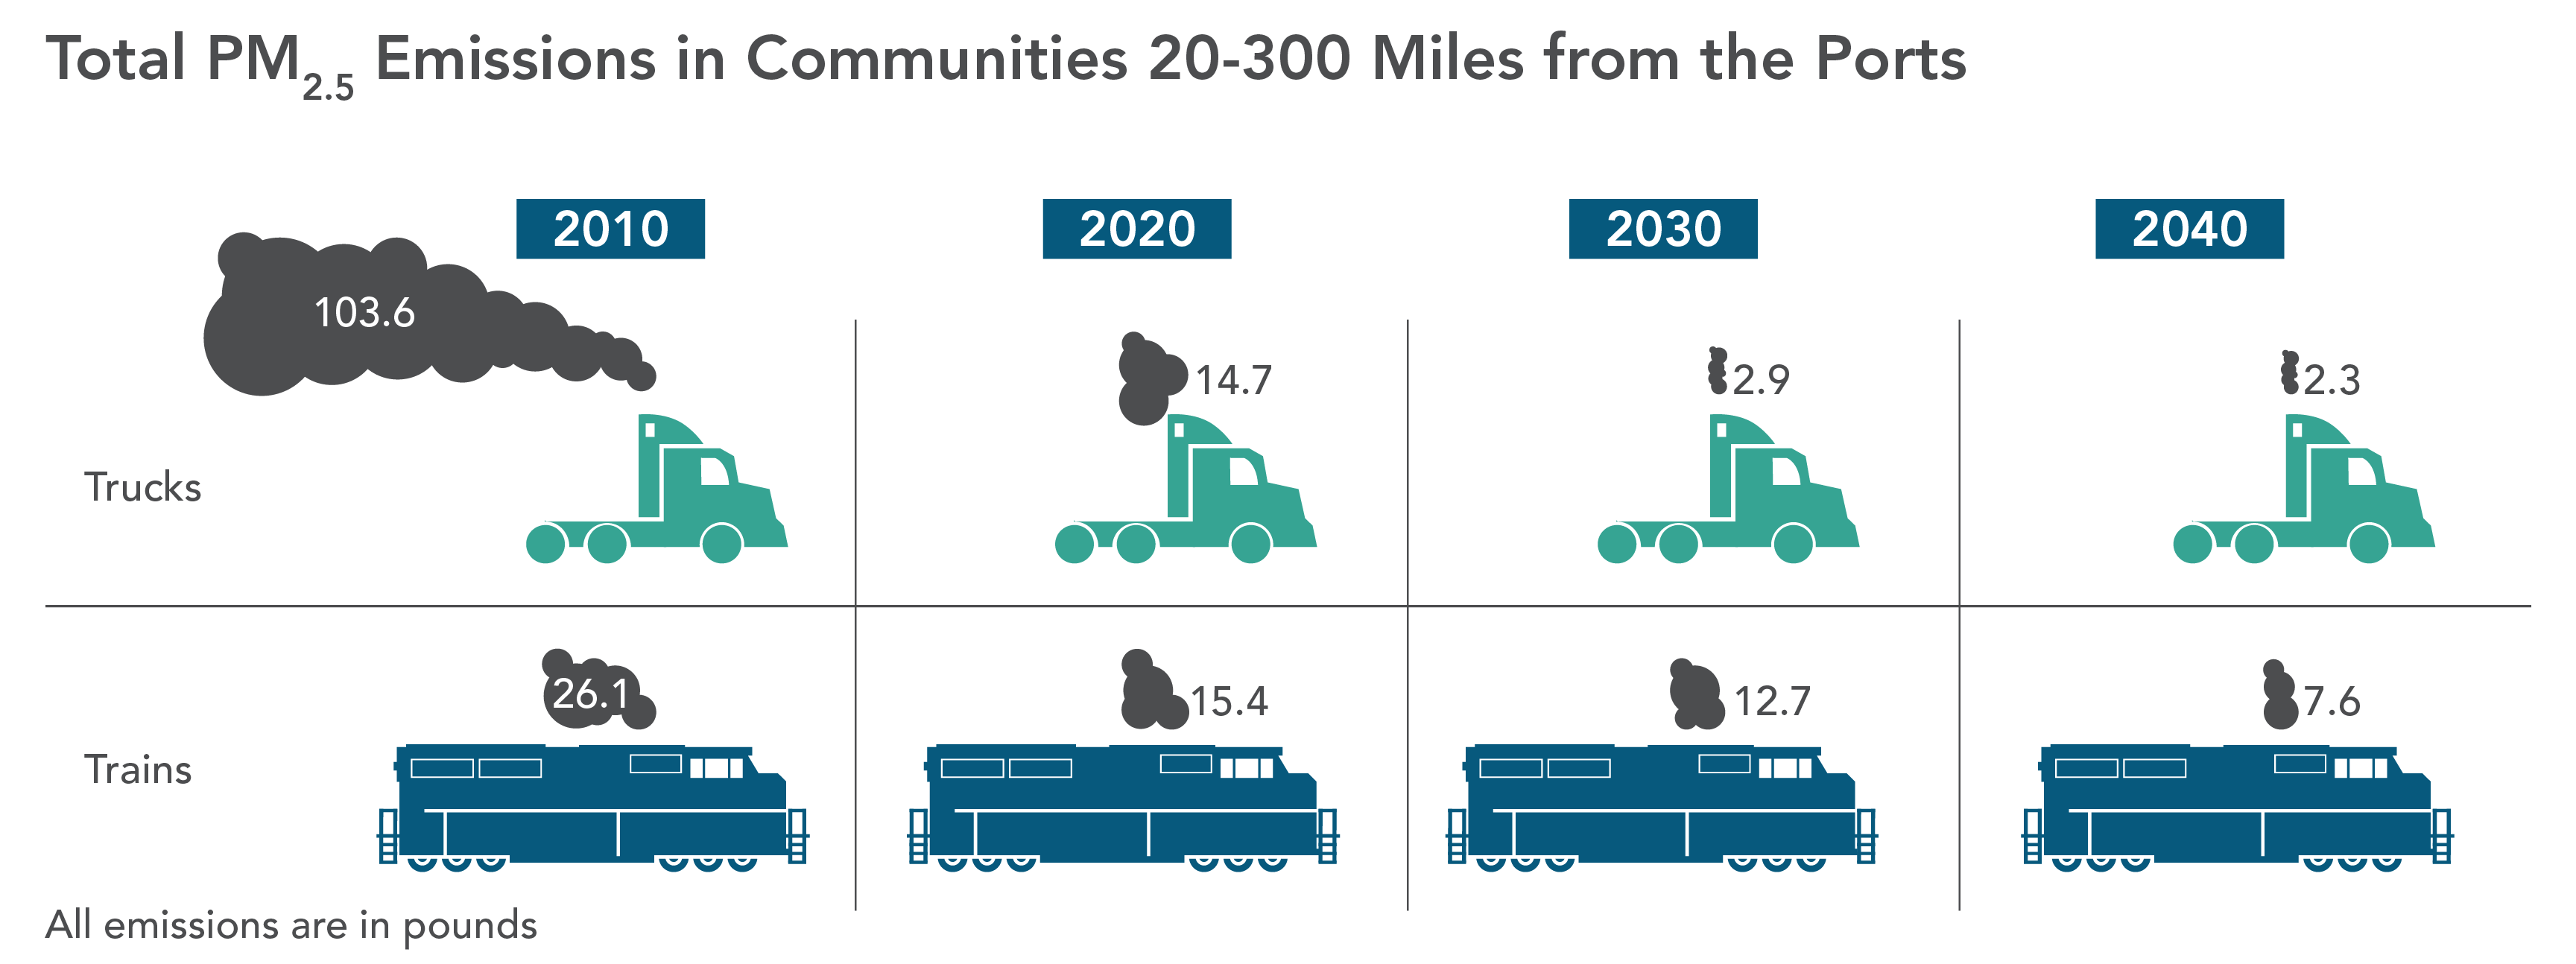 Comparison of truck and train PM 2.5 emissions in communities 20 to 300 miles from the ports.  Trucks emit less PM 2.5 than trains in 2020.